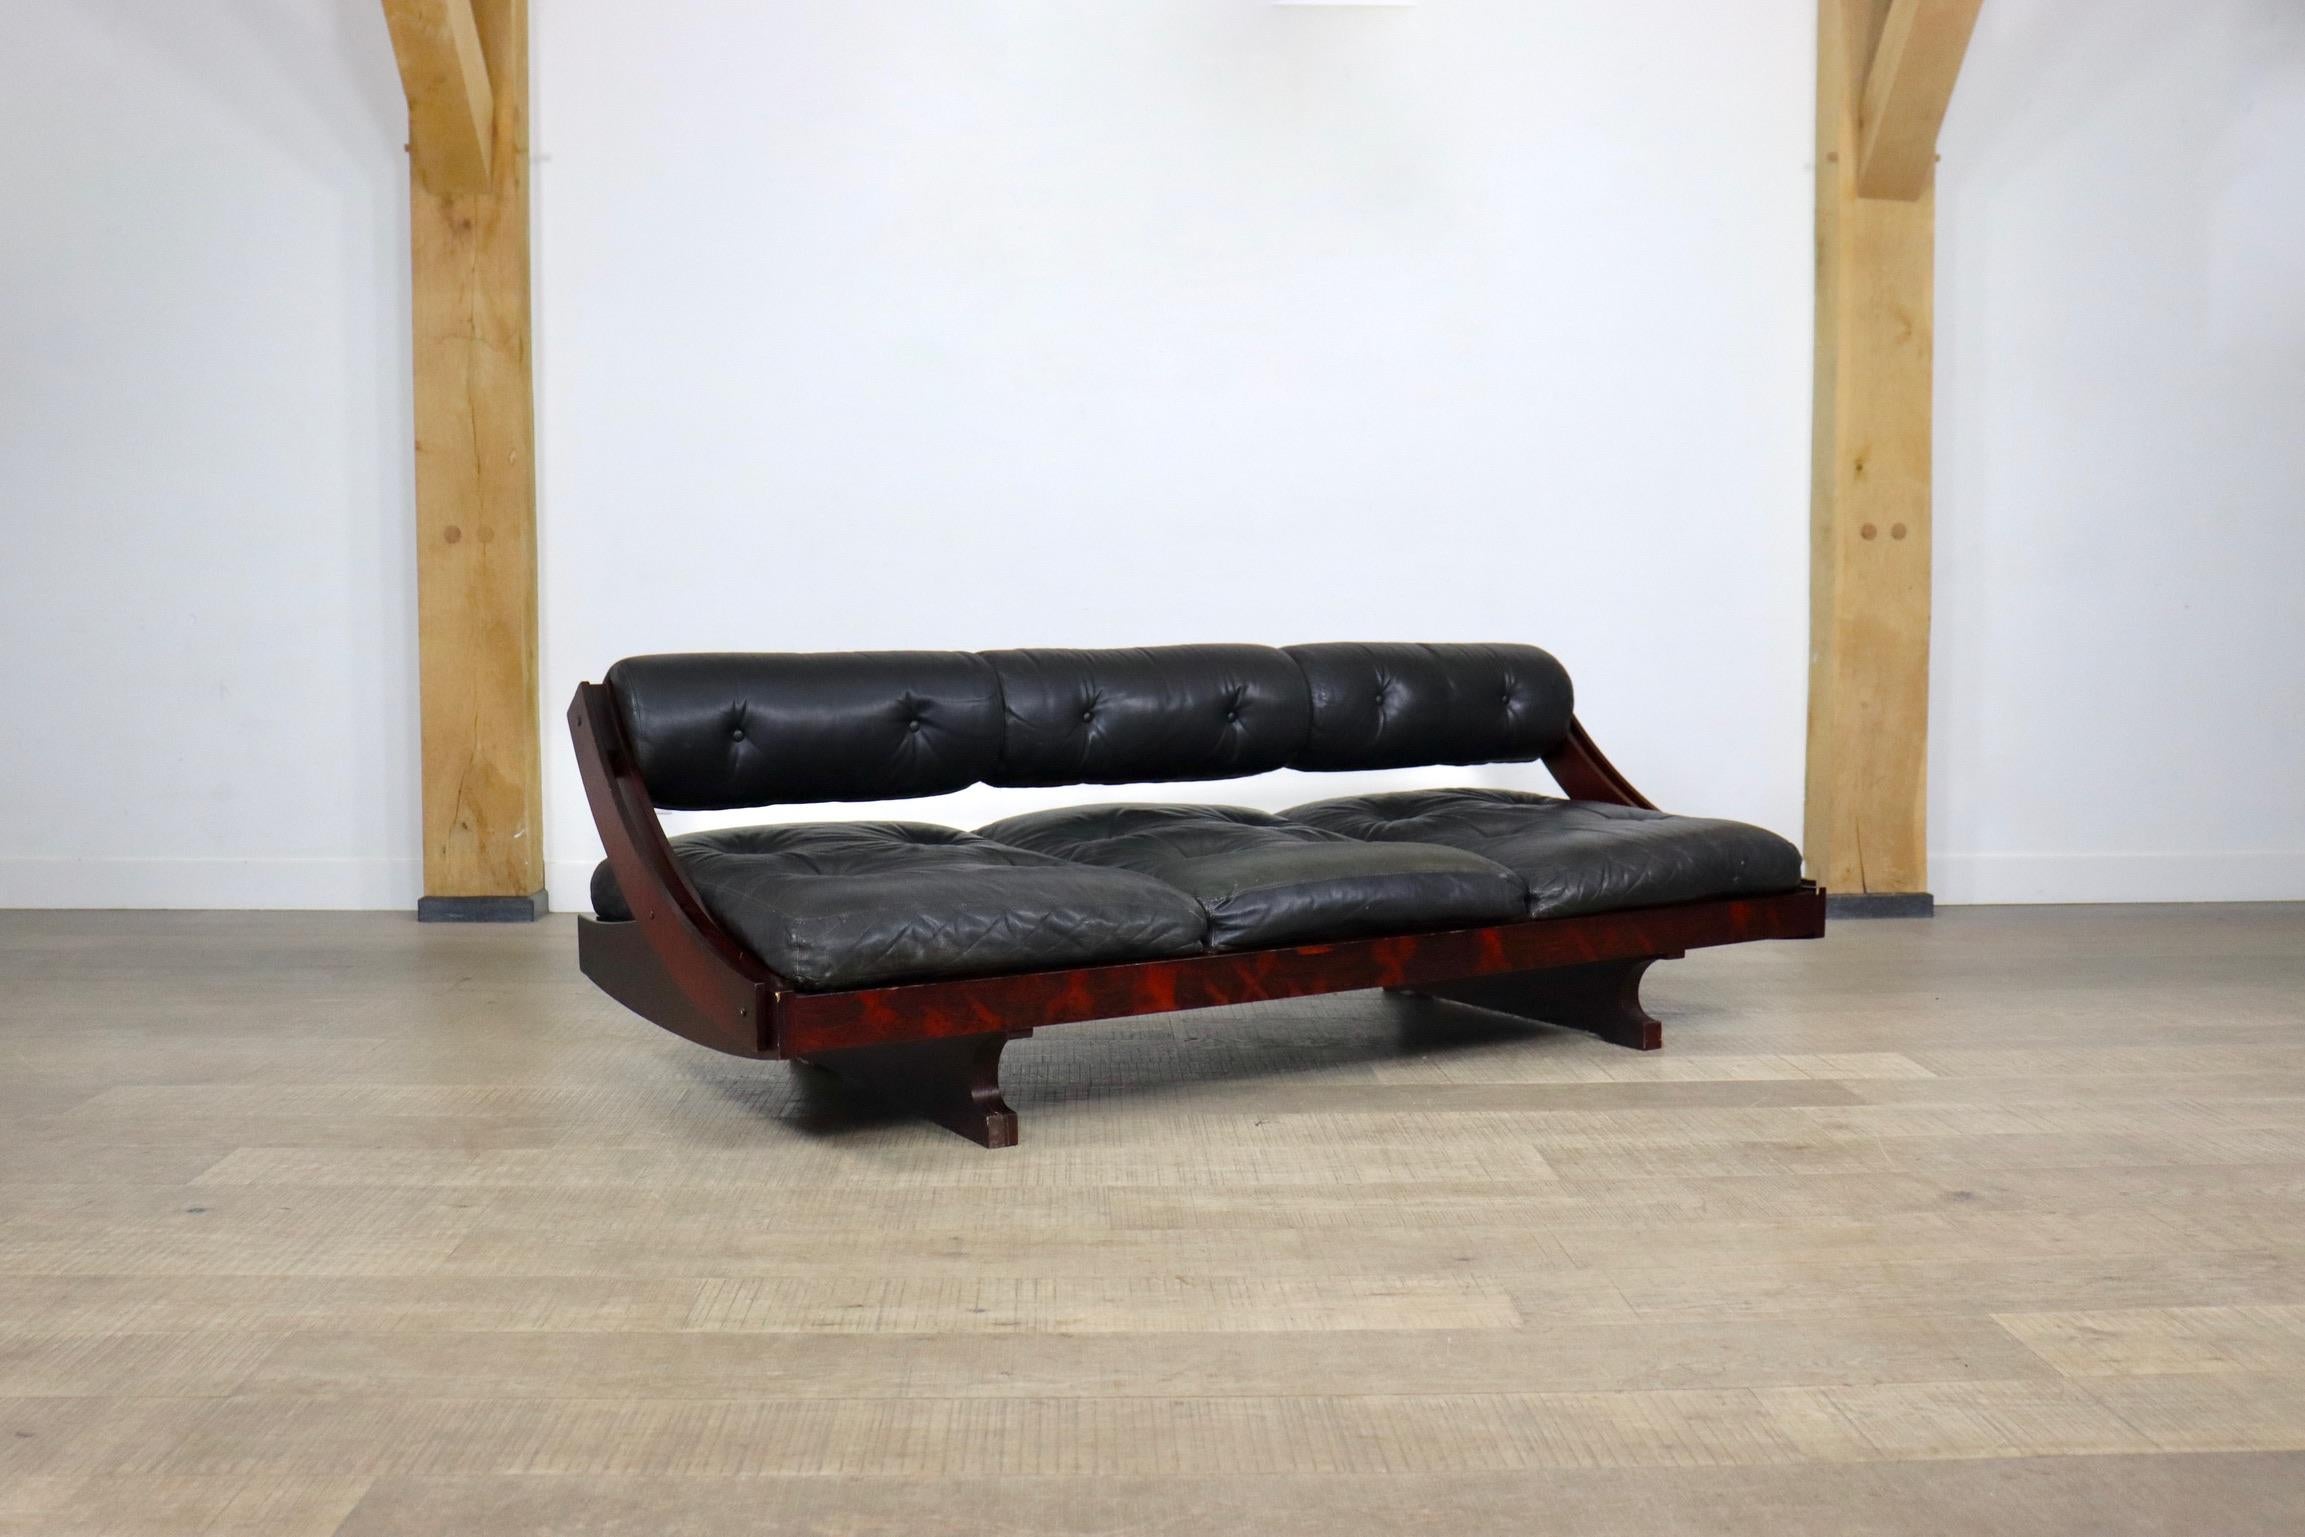 GS195 daybed by Gianni Songia for Sormani, 1963



Beautiful lounge sofa/daybed model GS195 designed by Gianni Songia for Sormani, Italy 1963. This sofa has a sculptural rosewood sliding frame and gorgeous black leather cushions and seating. The